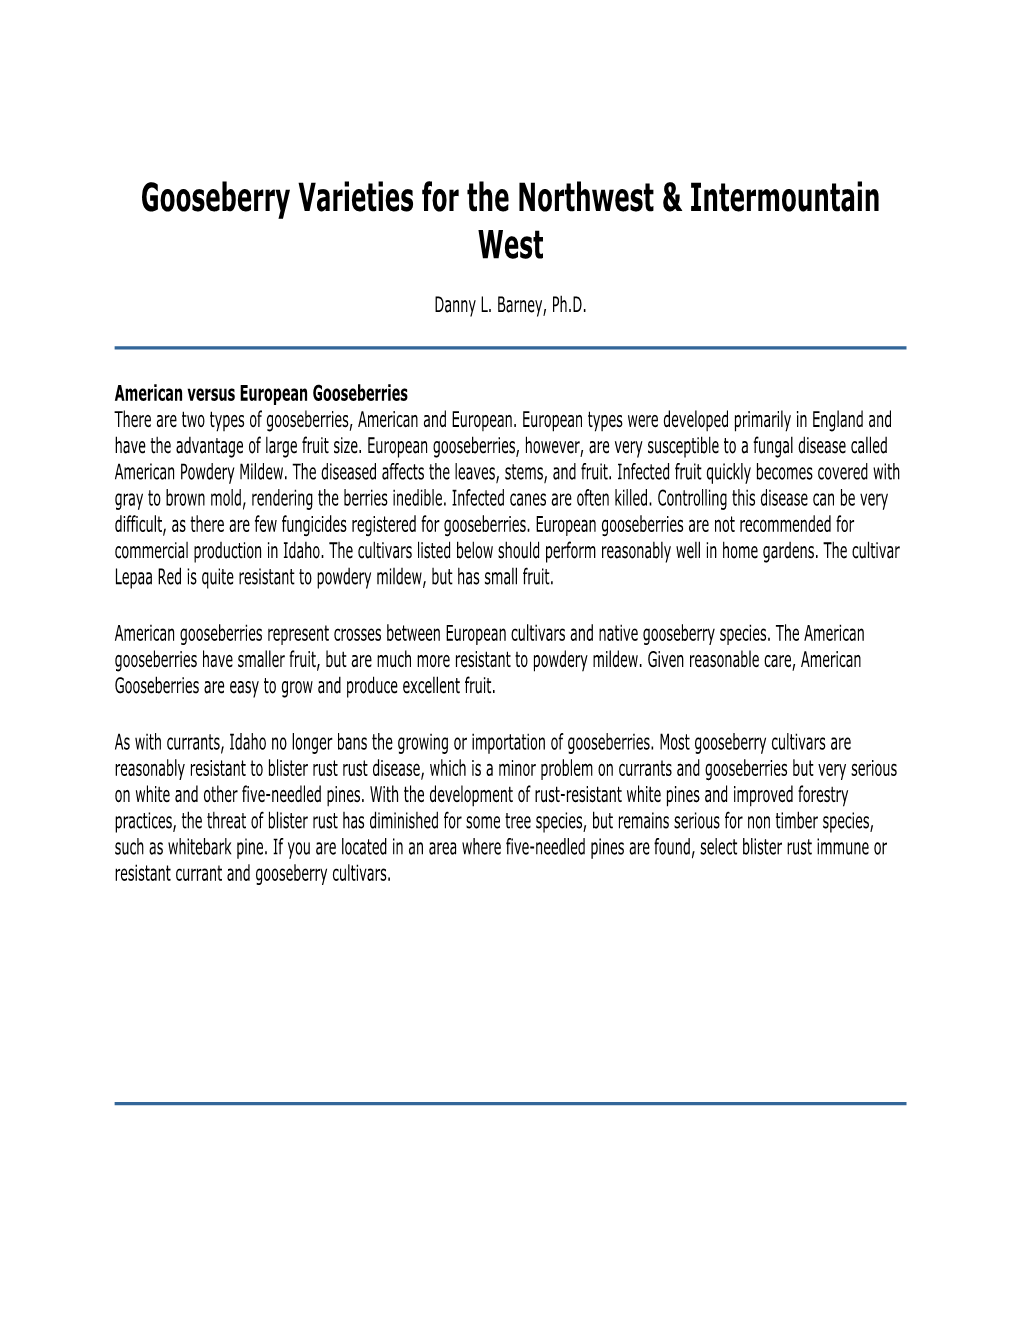 Gooseberry Varieties for the Northwest & Intermountain West